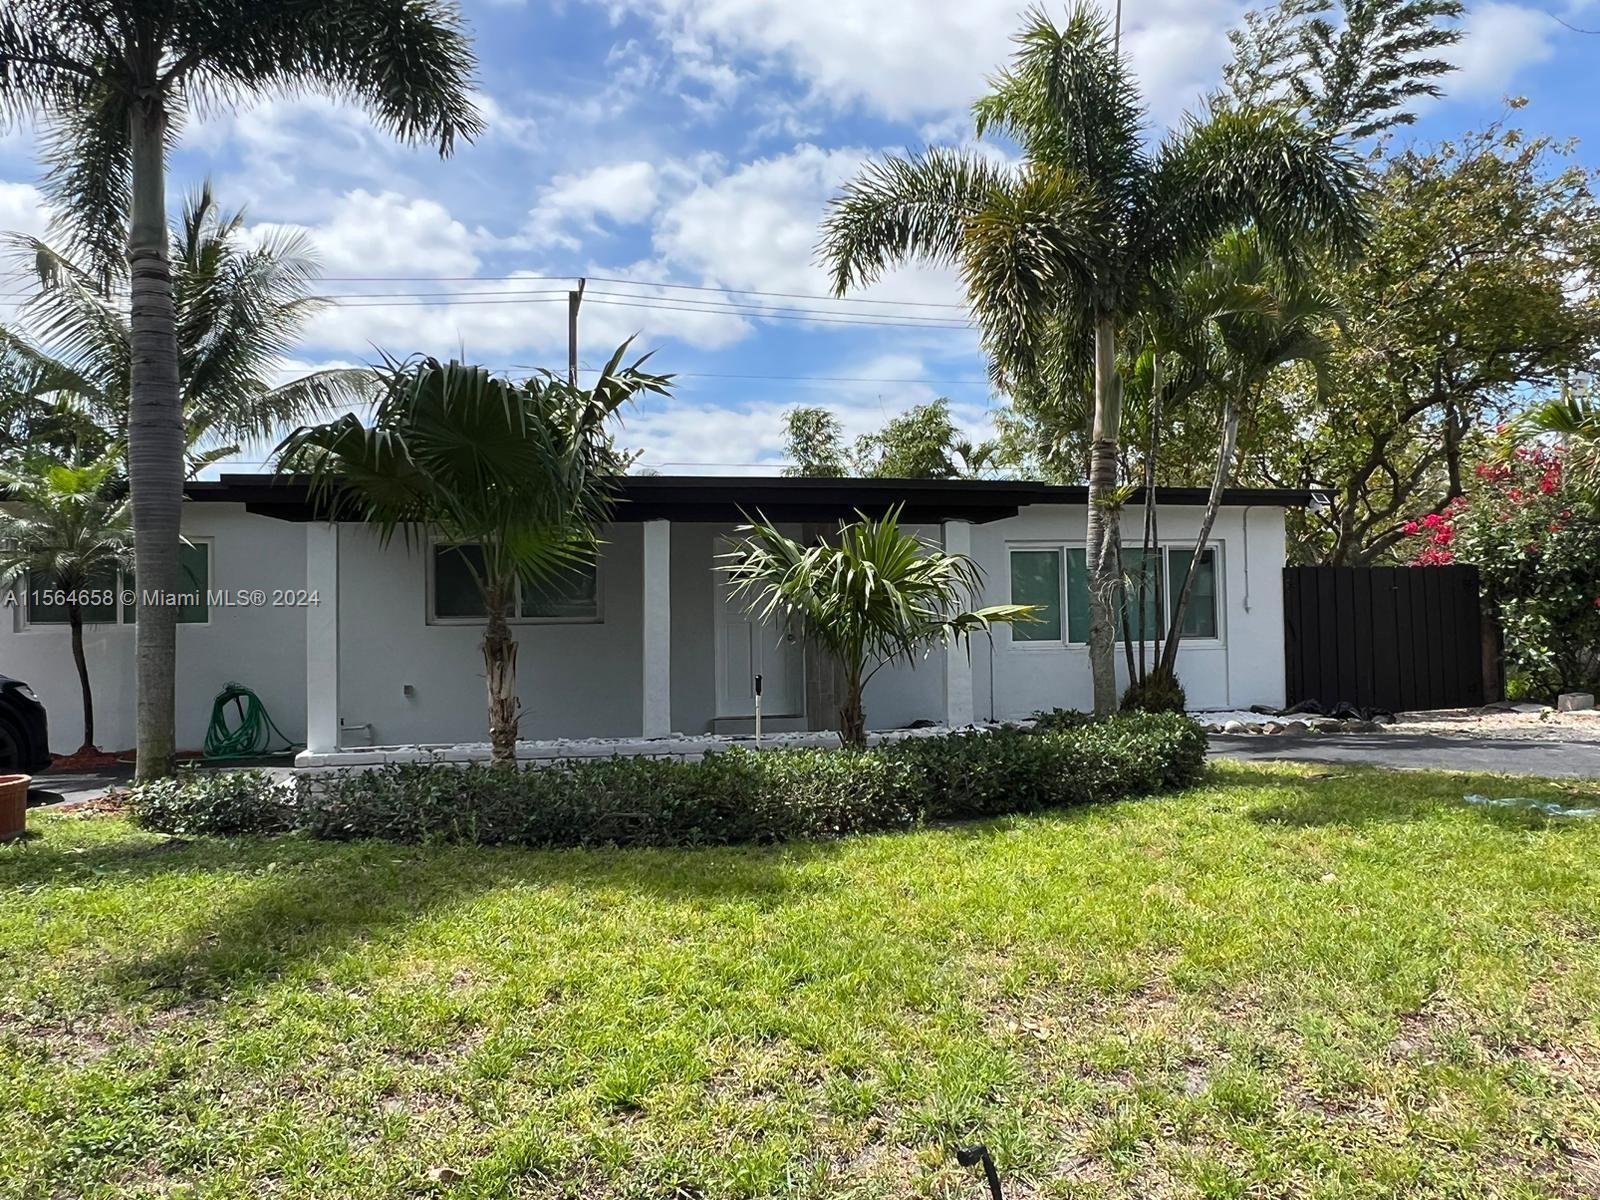 3 bedroom/2 bath single family house with pool in Riverland Village in the heart of Ft Lauderdale. w